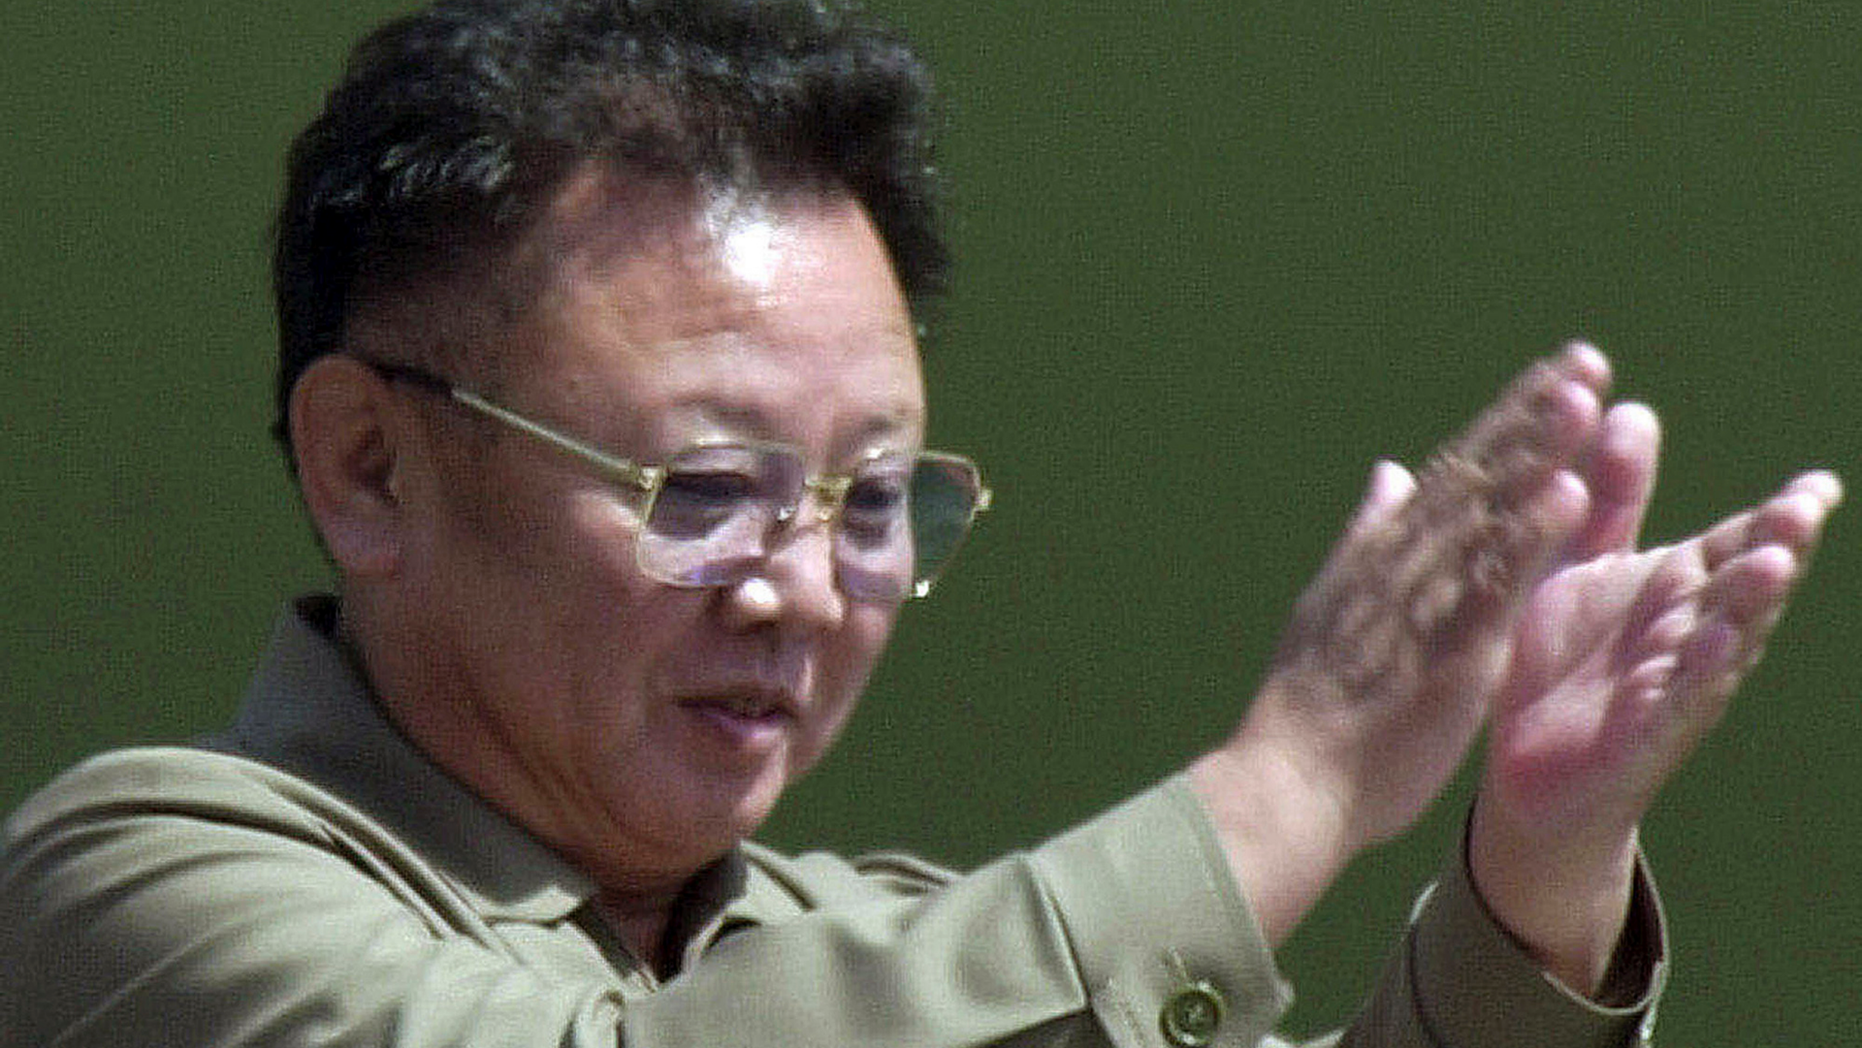 FILE - In this April 25, 2002, file photo, then North Korean leader Kim Jong Il claps from the balcony as soldiers salute him during a military parade, celebrating the foundation of the armed forces in Pyongyang, North Korea. North Koreans are marking the anniversary of the death of leader Kim Jong Il seven years ago with visits to statues and vows of loyalty to his son, Kim Jong Un. (AP Photo/Katsumi Kasahara, File)